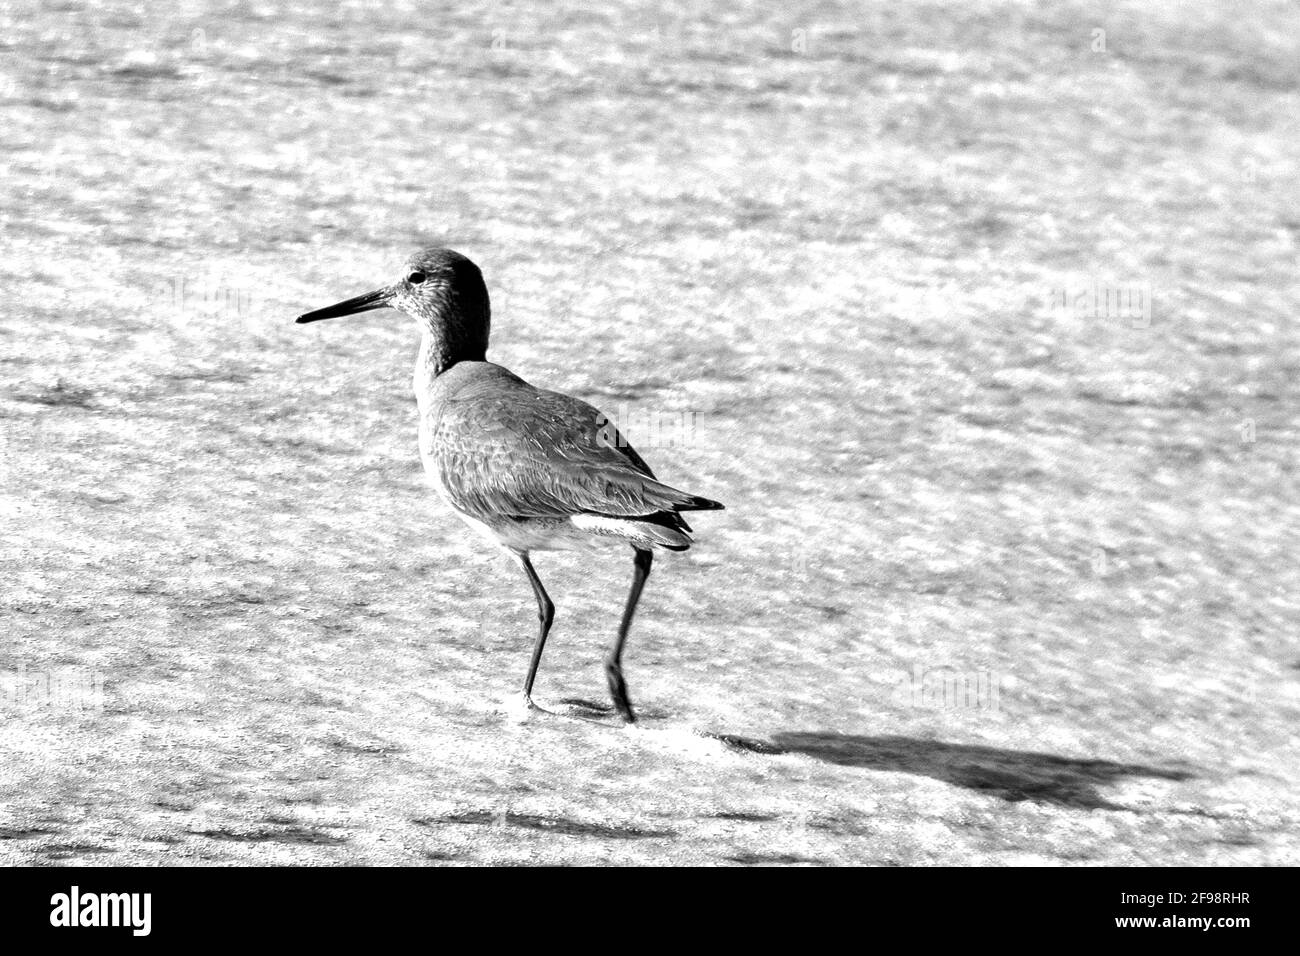 Whimbrel shorebird wading in the surf on Surfers Knoll beach in Ventura California United States in black and white Stock Photo